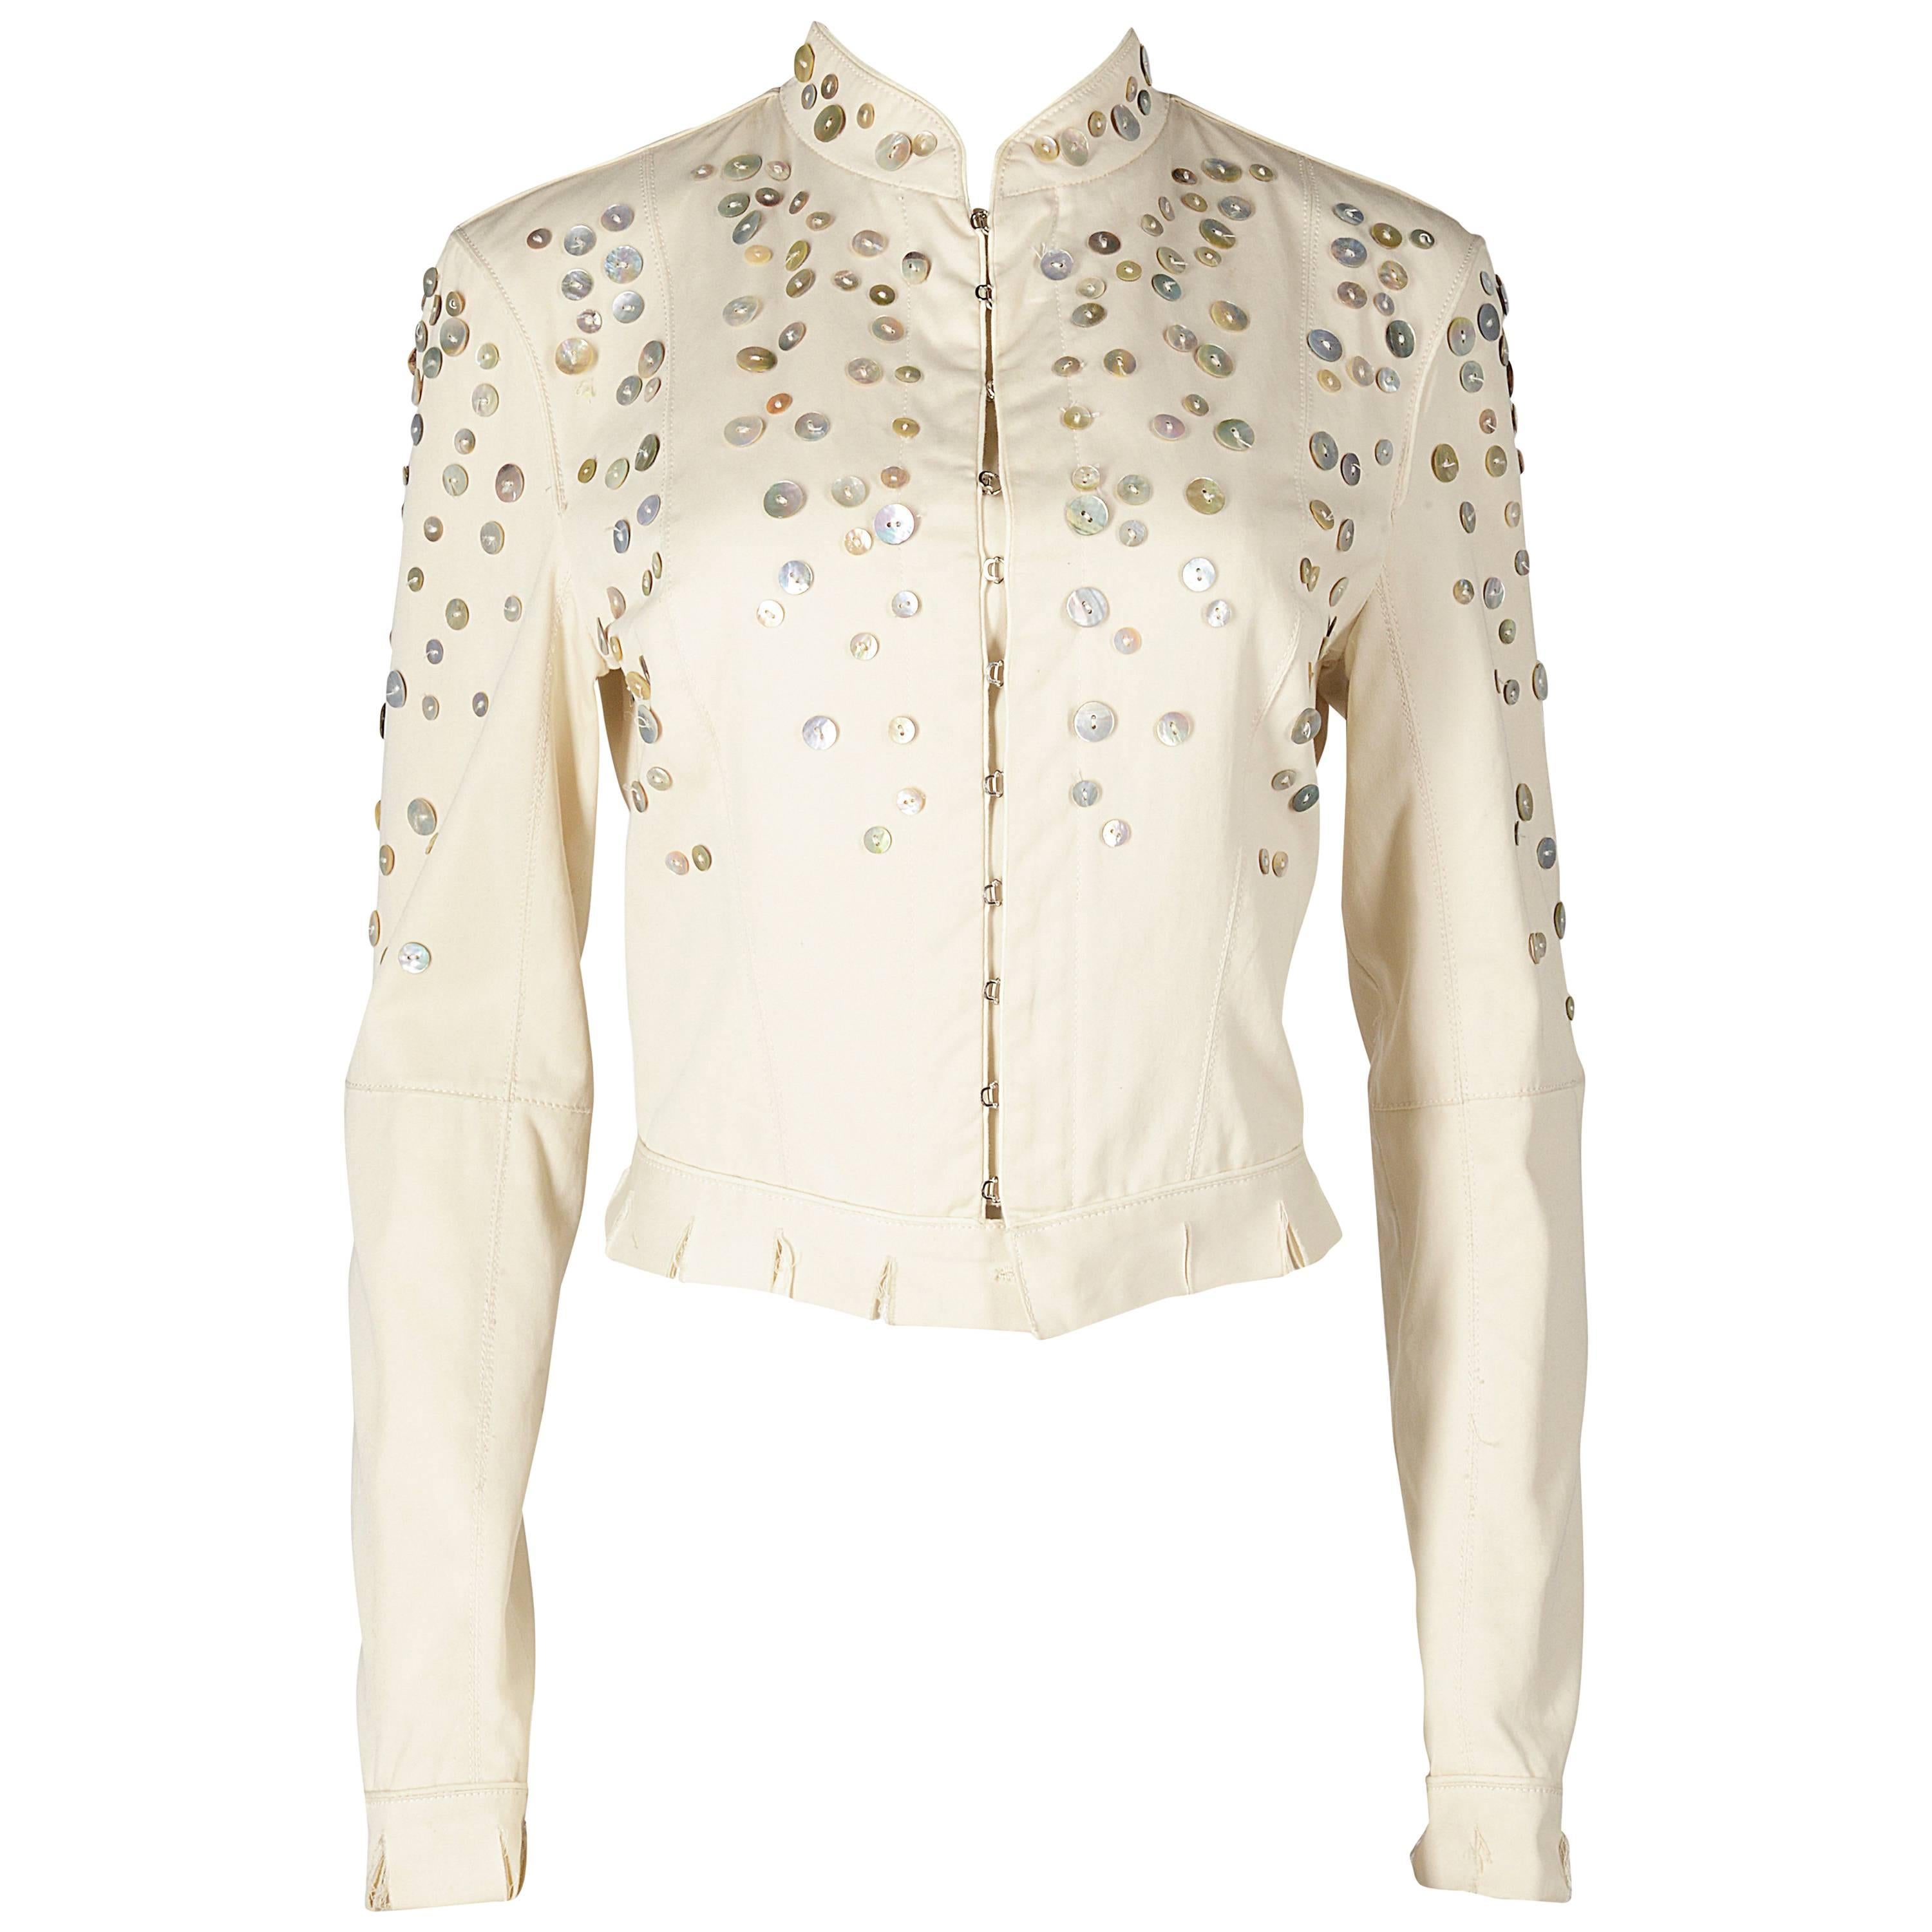 Alexander McQueen ivory cotton jacket with decorative pearl buttons, SS 2003